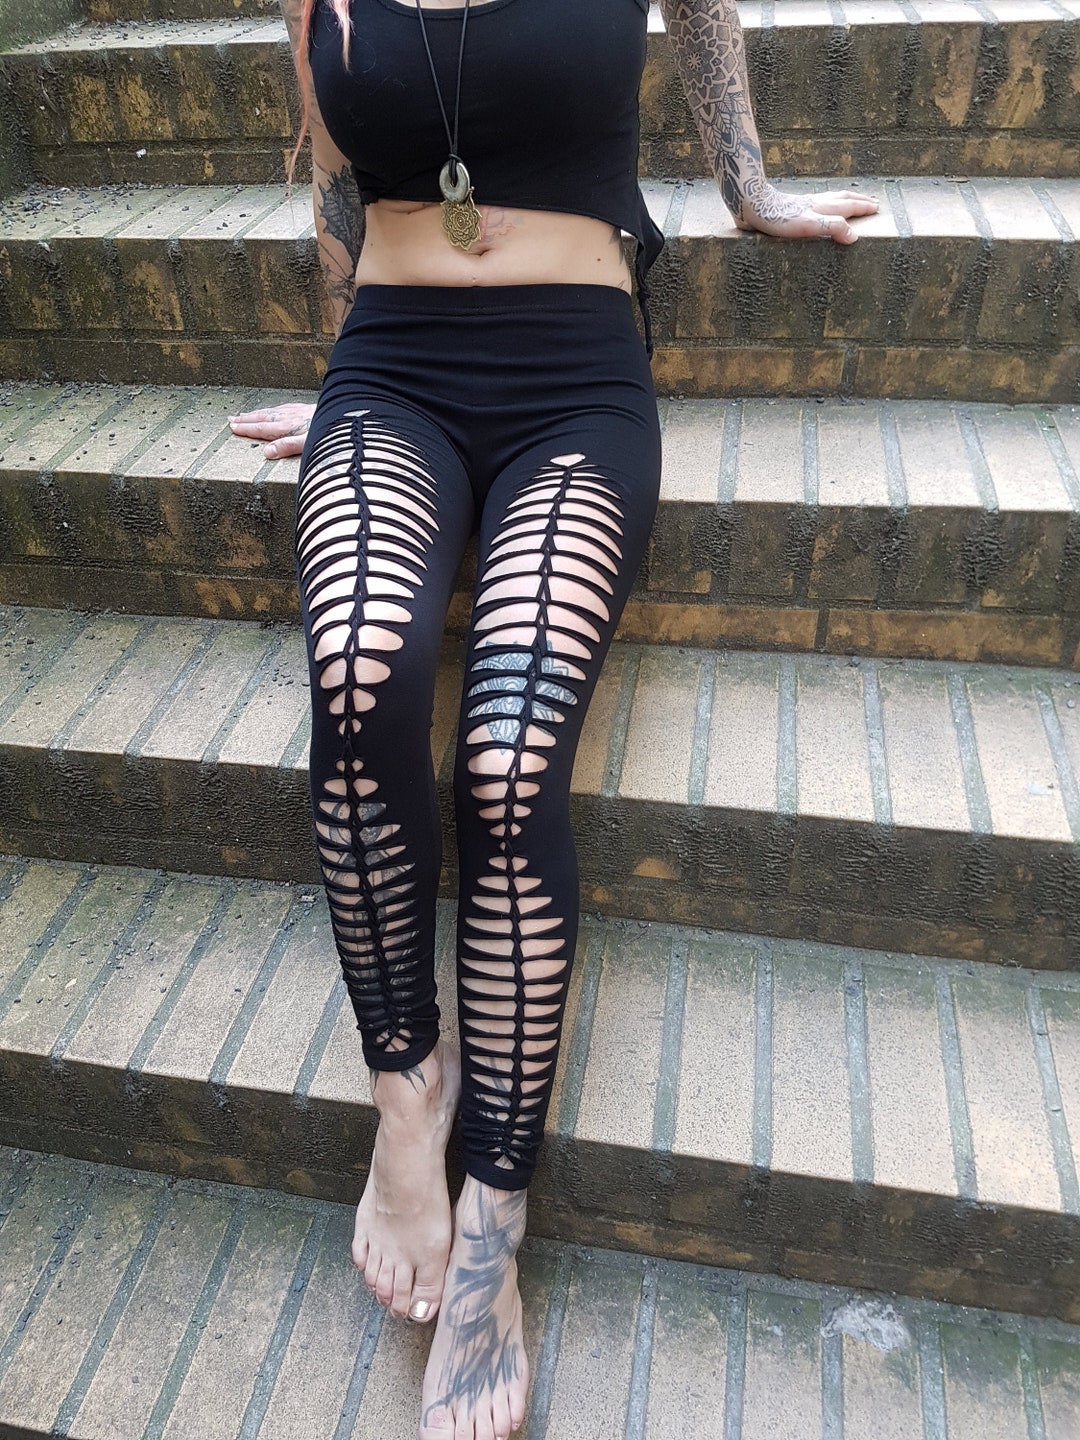 XXS-6XL Frontcut Leggings Black Cutouts Cut Out Goa Pixie Braided Psy  Burning Cosplay Yoga Lacing Geometric Pattern Rave Knotted -  Finland